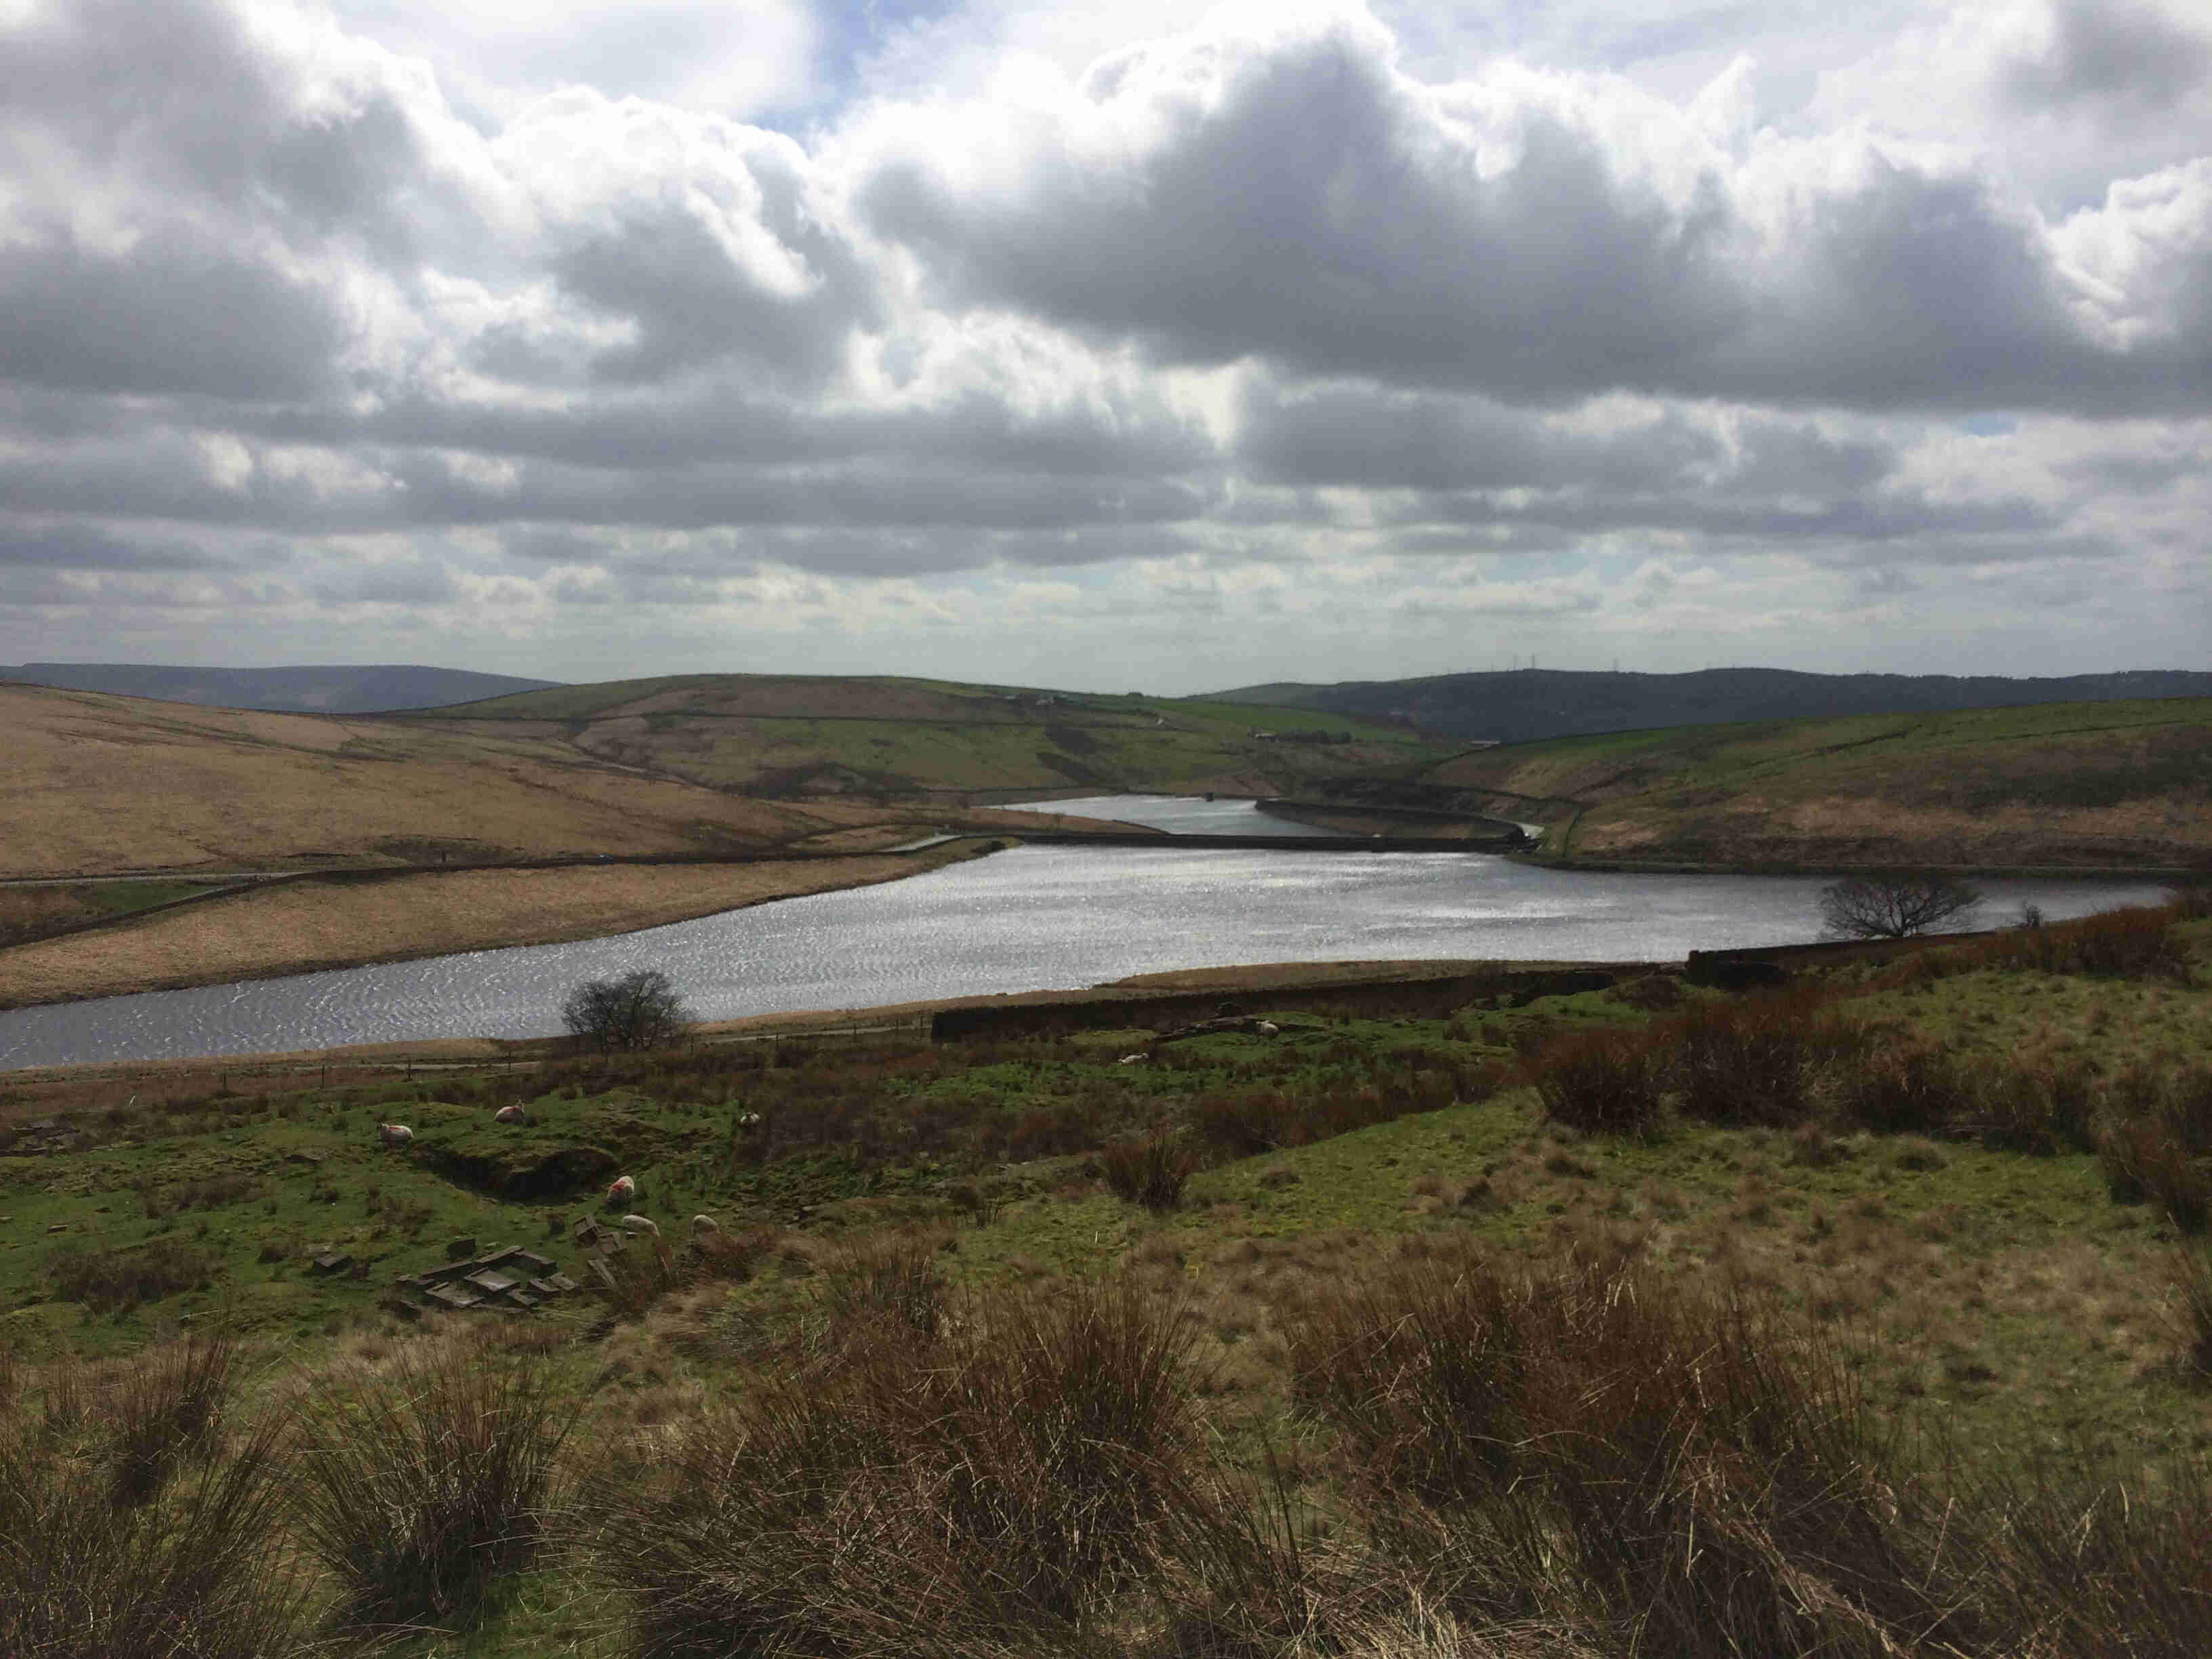 A view from the top of a hill, overlooking a small lake in the middle of grass hills, with clouds in the sky